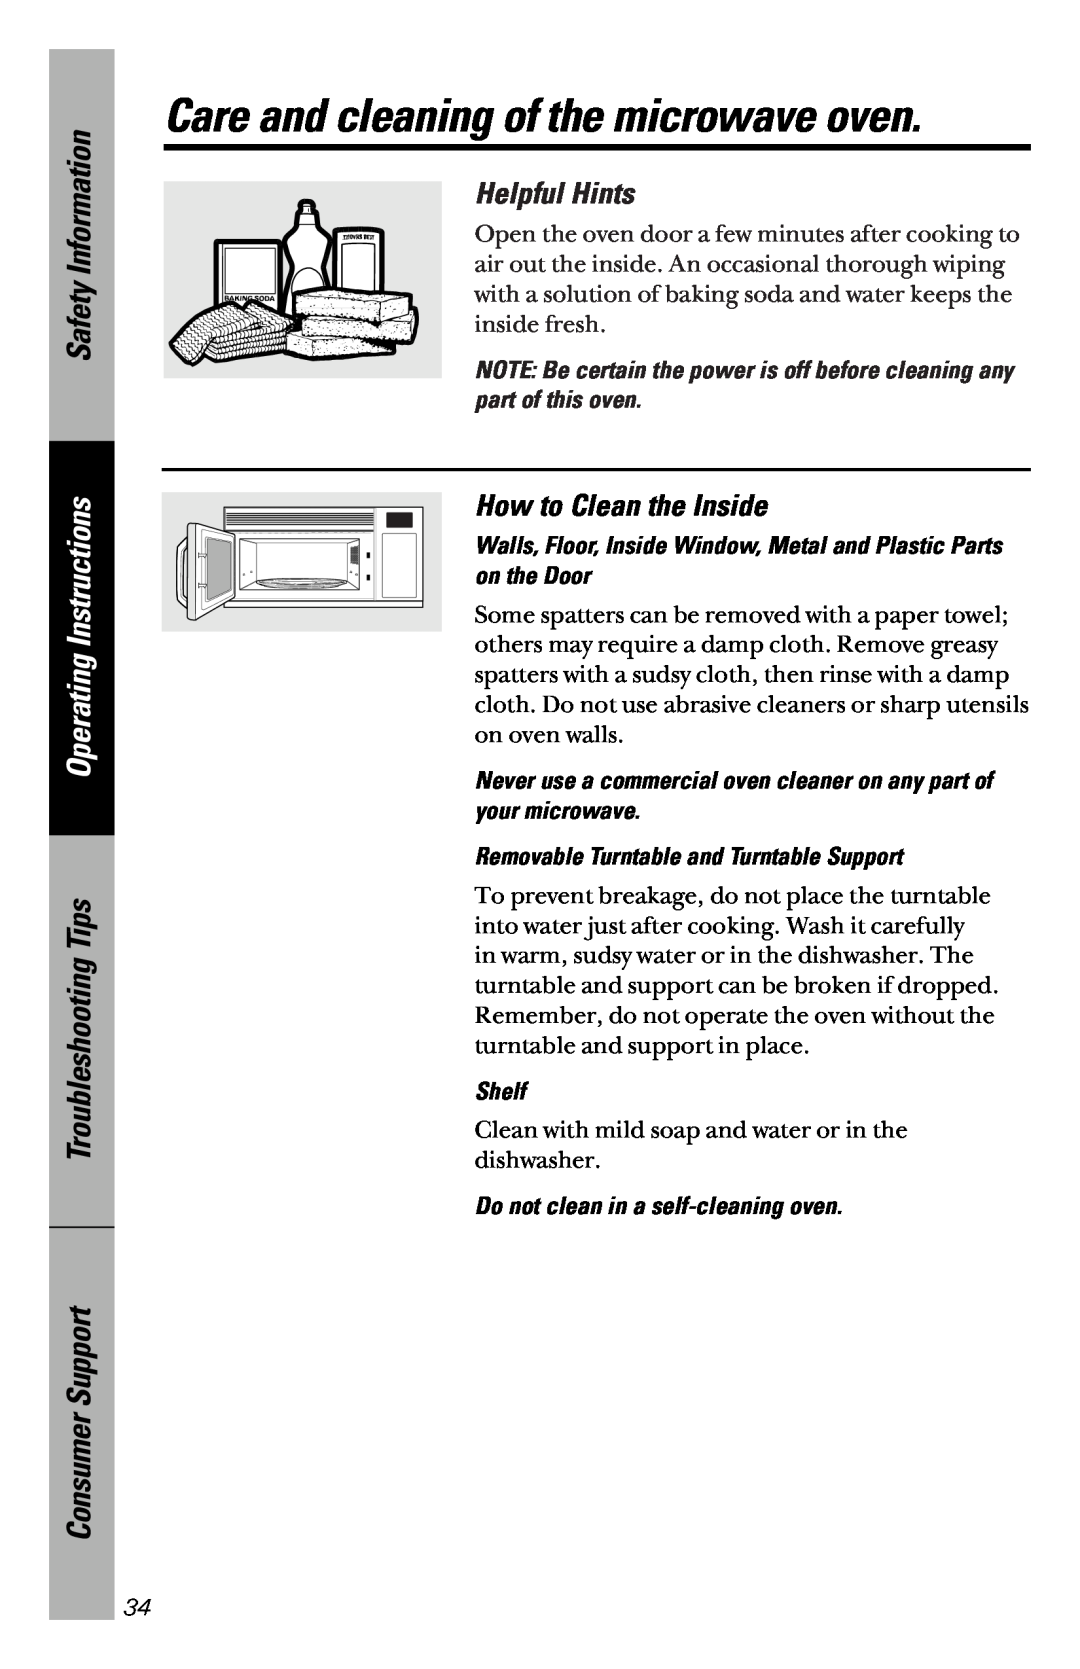 GE JVM1841 Care and cleaning of the microwave oven, Helpful Hints, How to Clean the Inside, Safety Information, Shelf 